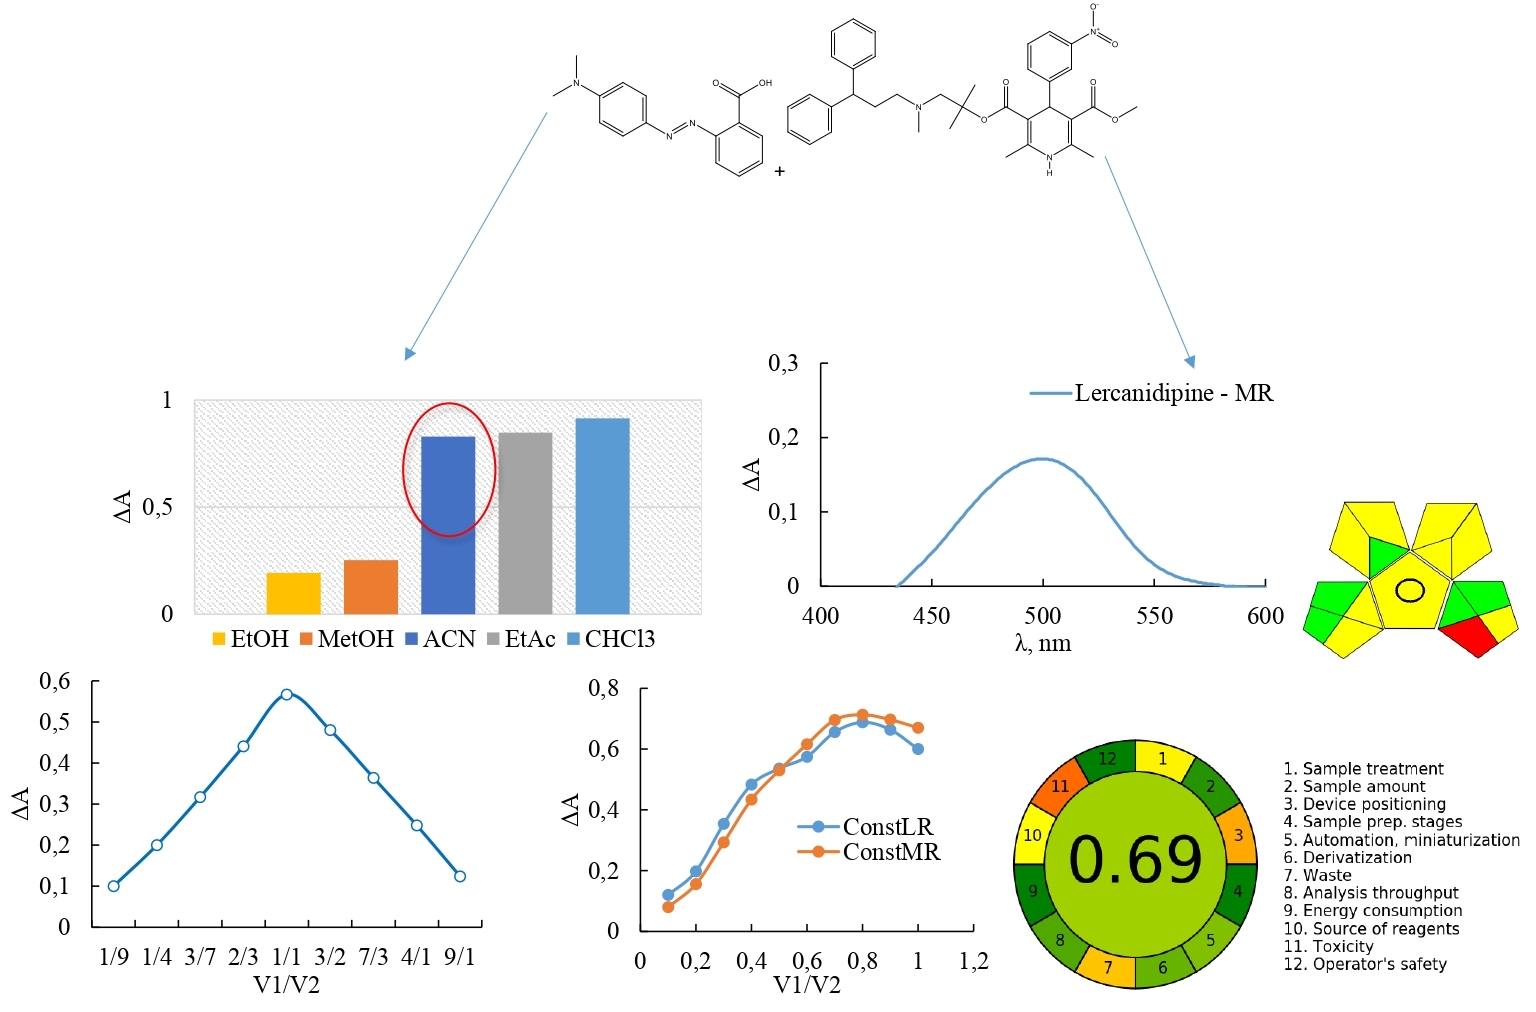 Novel eco-friendly spectrophotometric determination of lercanidipine hydrochloride in tablets using methyl red